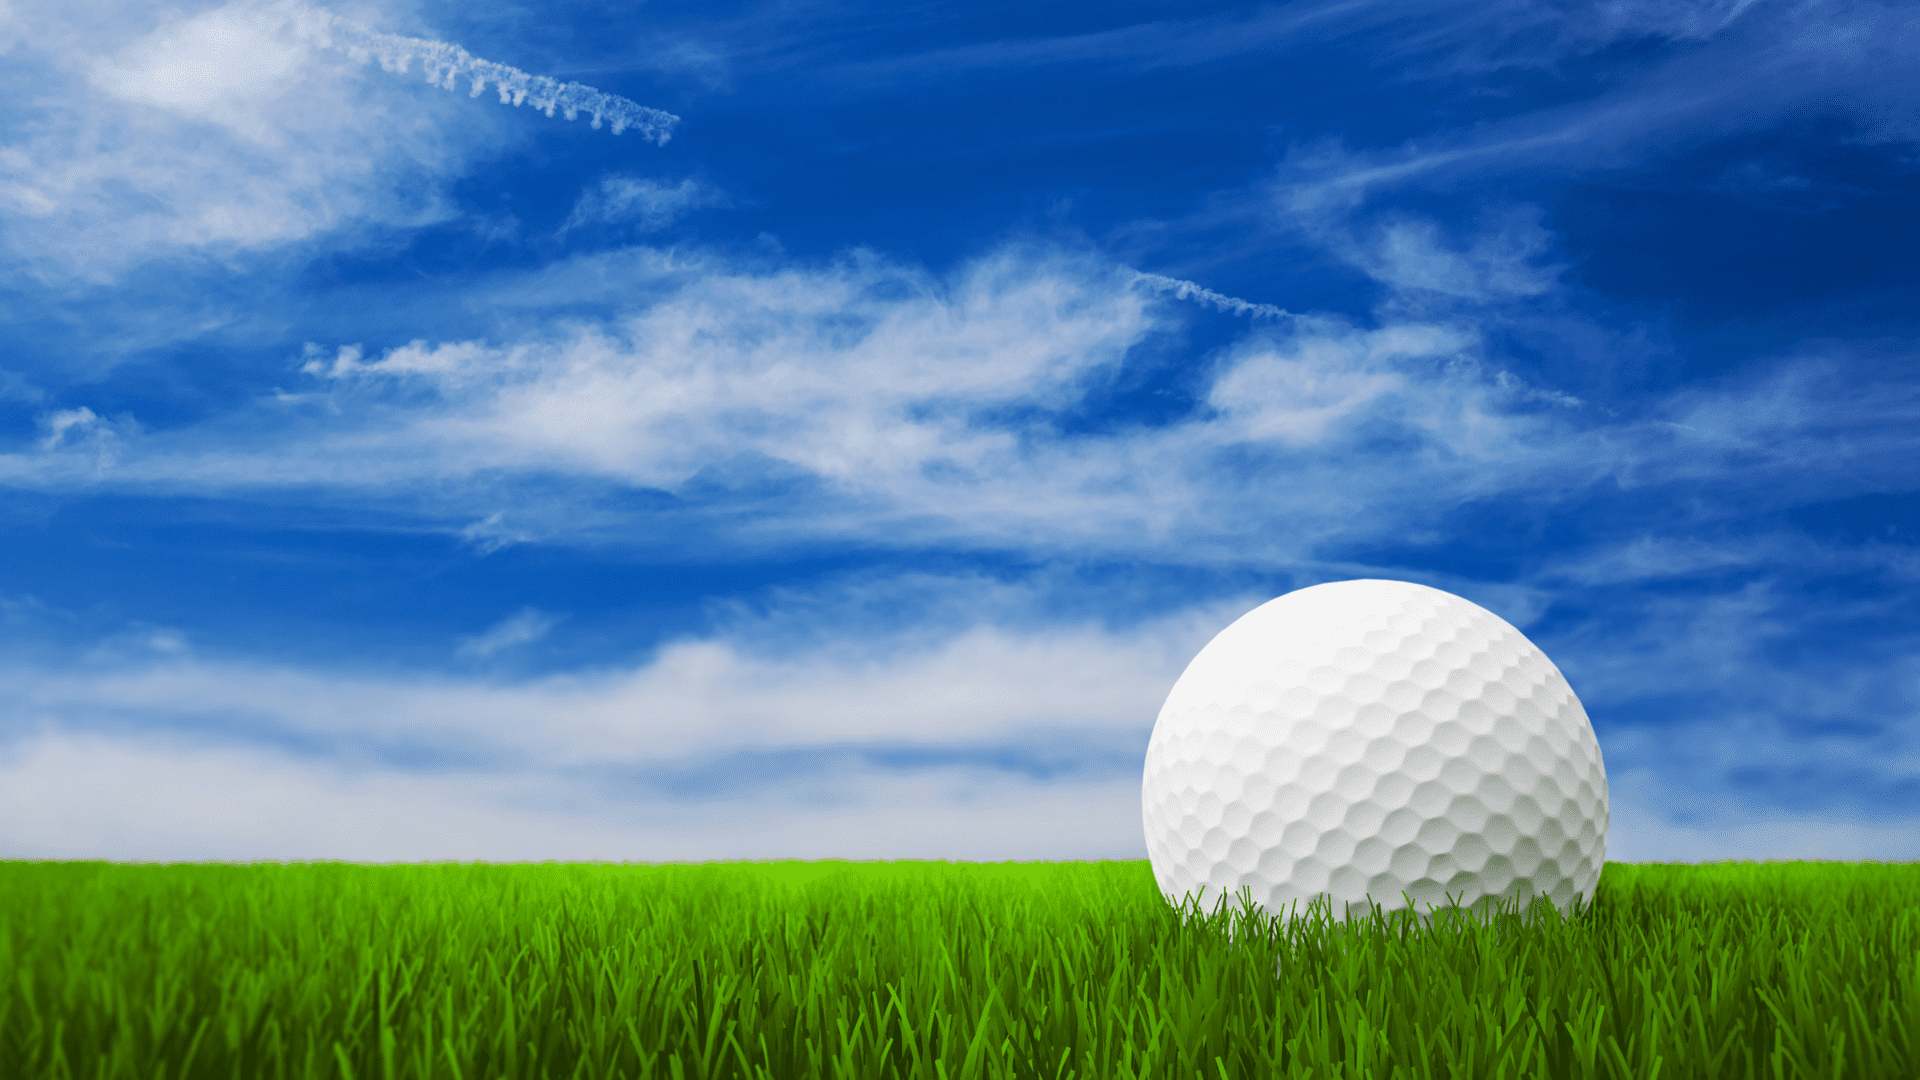 Is golf a sport showing a golf ball on the green